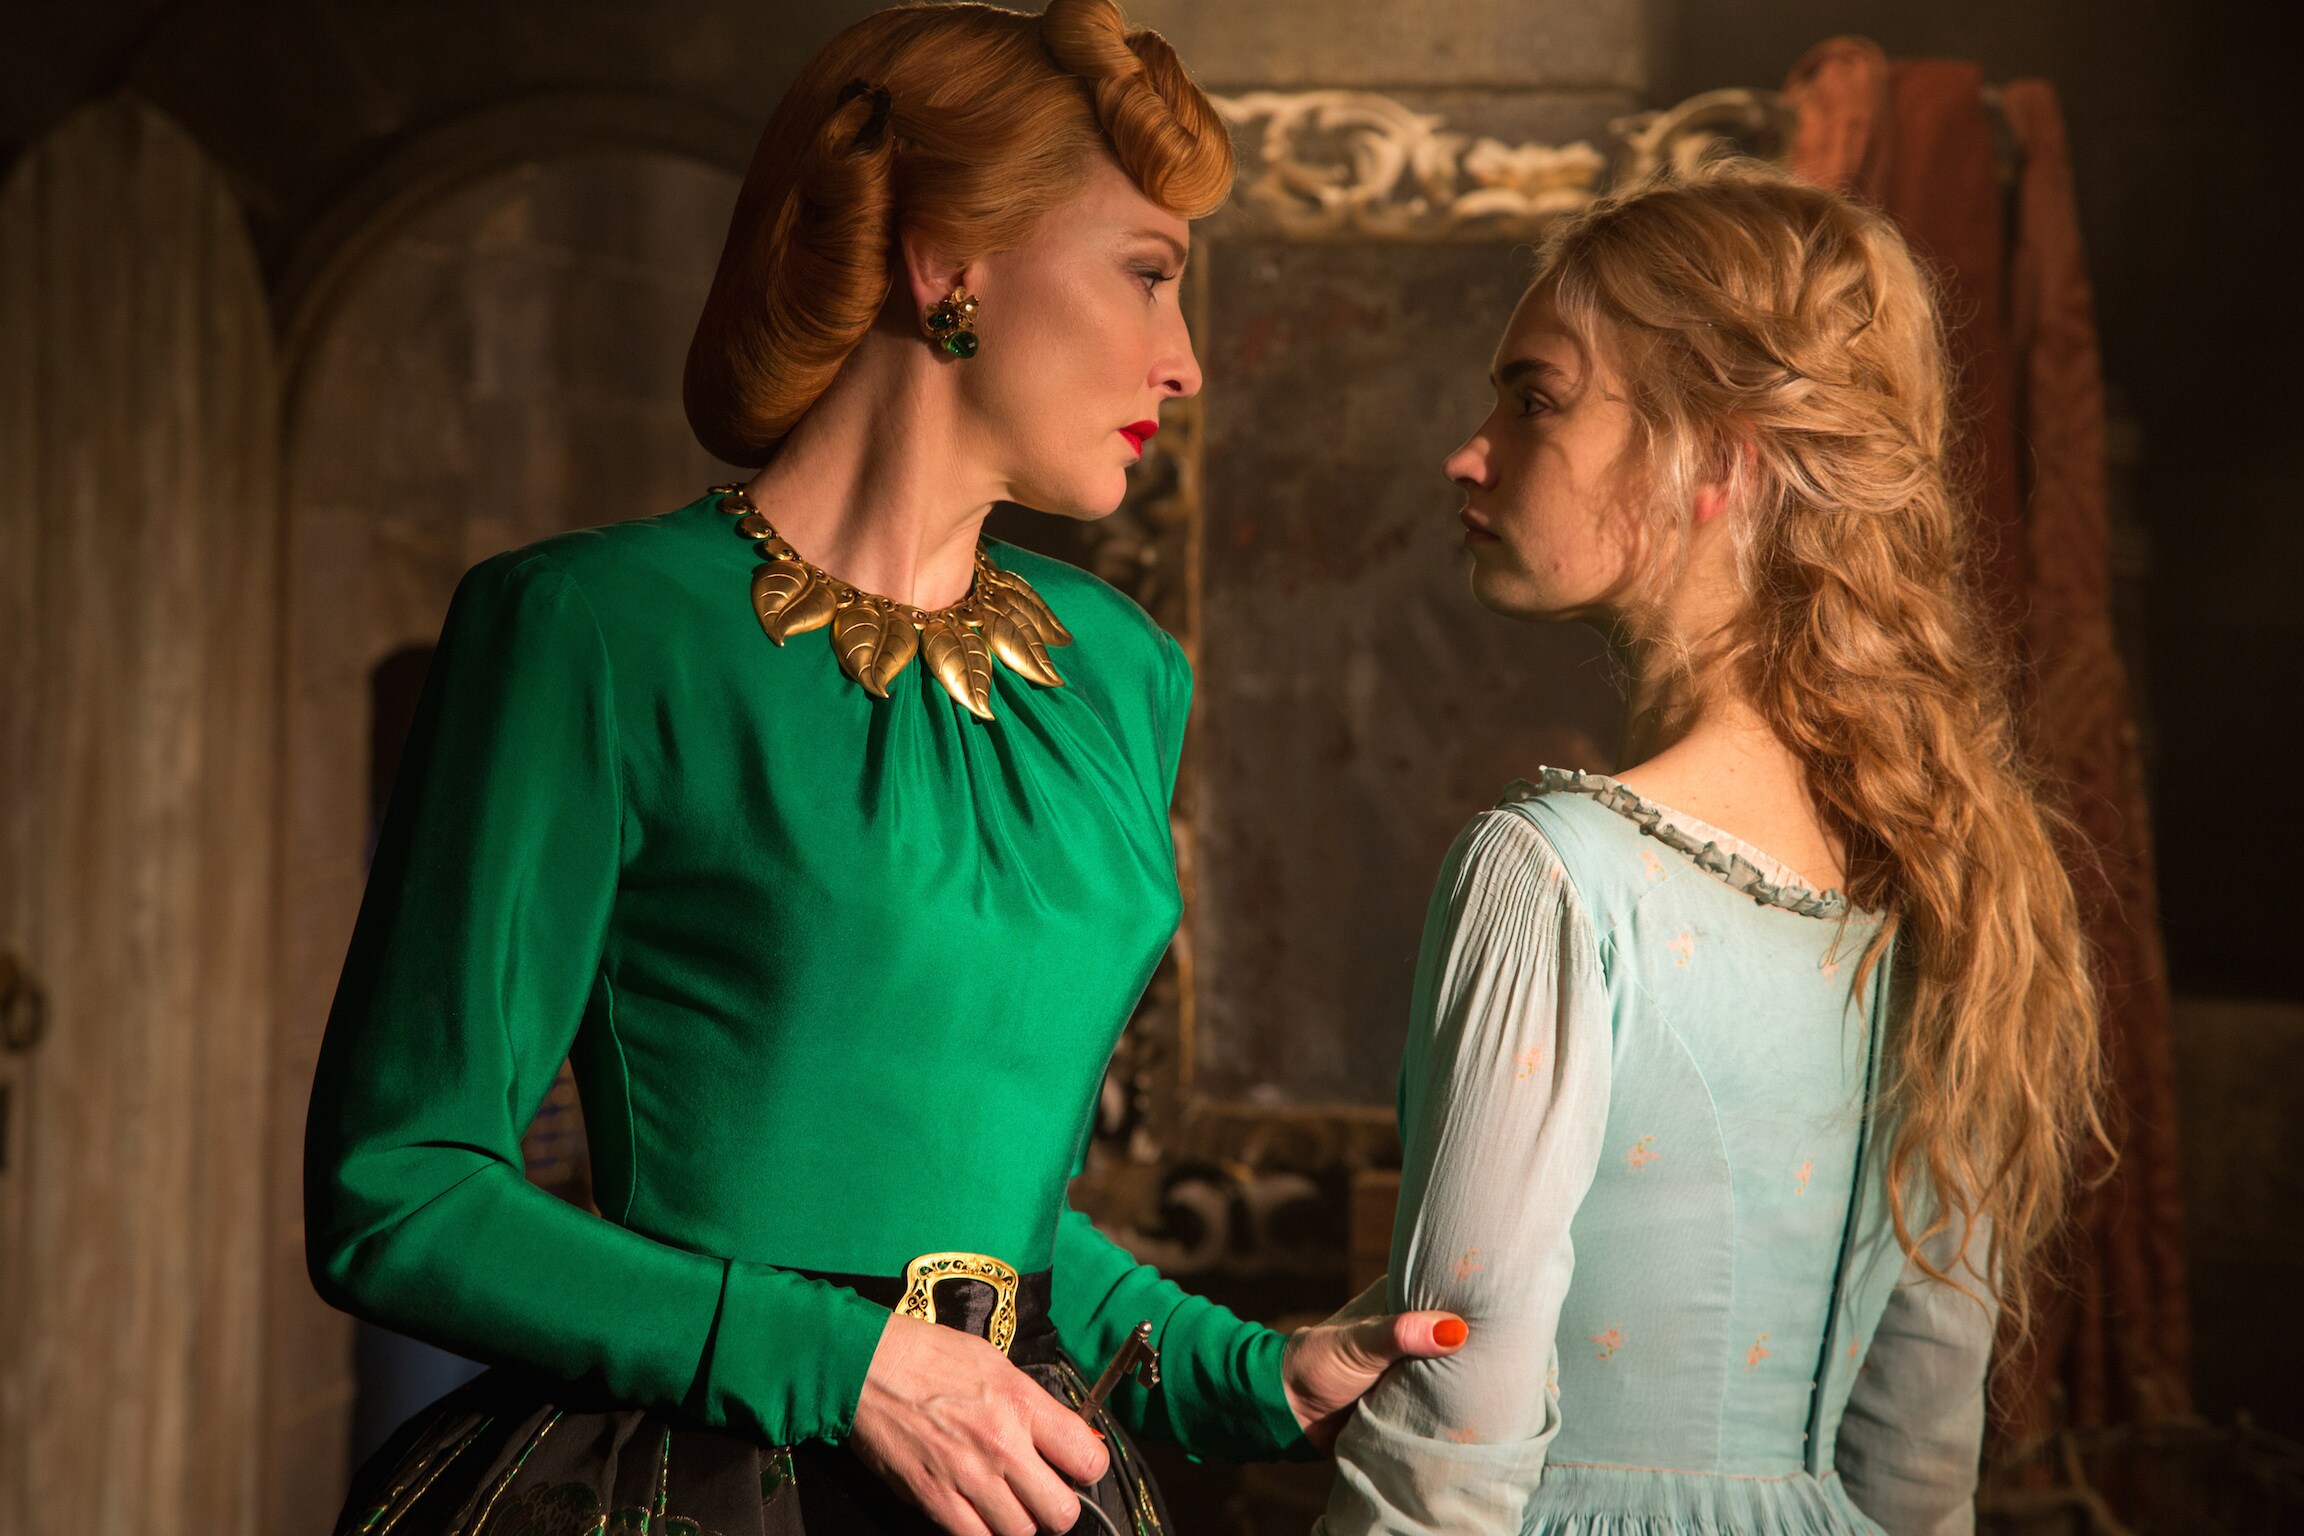 Actors Cate Blanchett (as the Stepmother) and Lily James (as Cinderella) in the movie Cinderella.